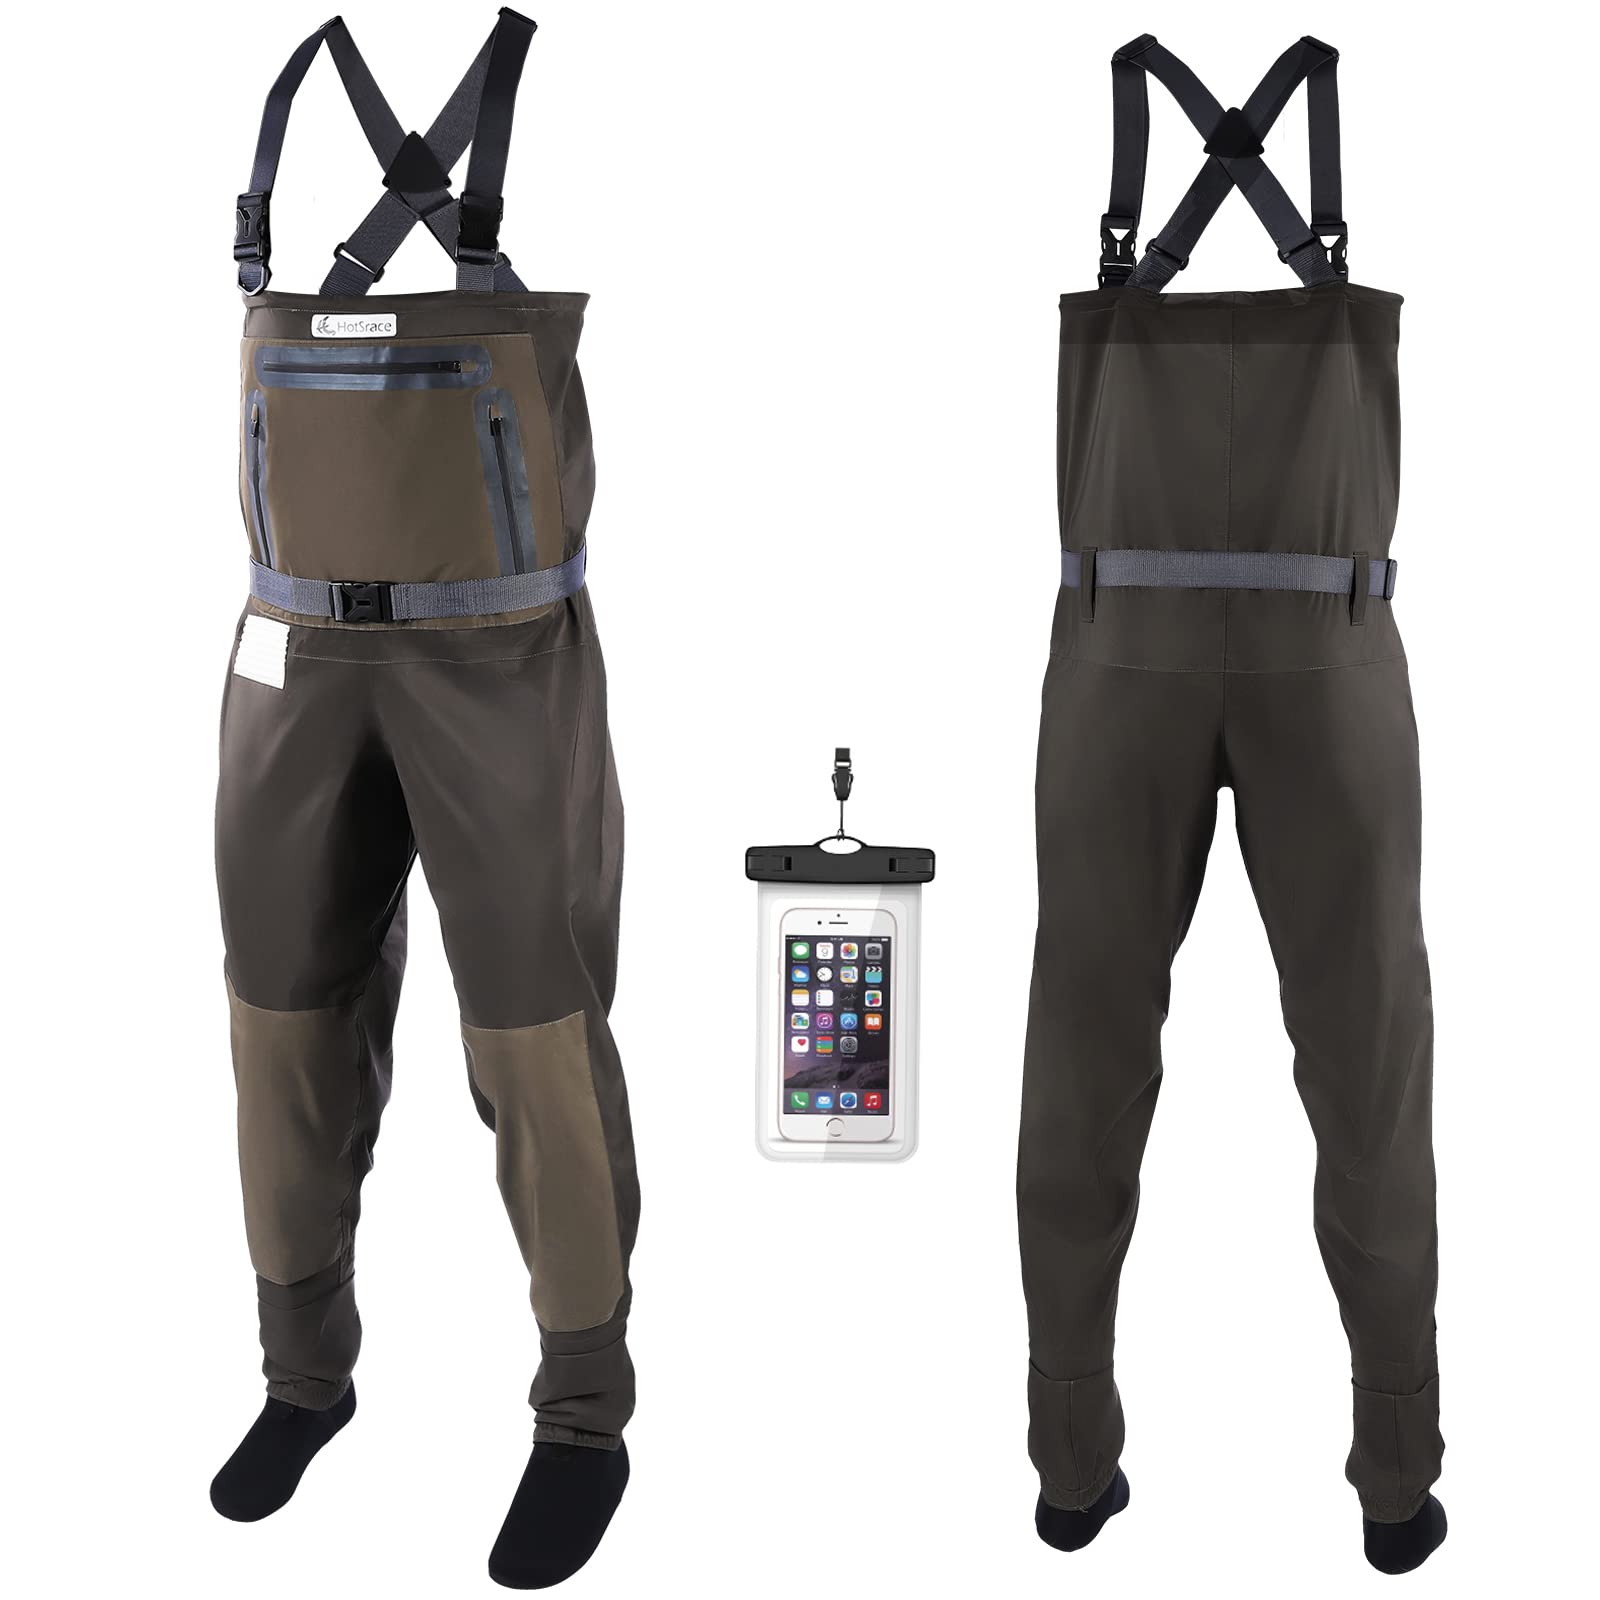  HotSrace Chest Fishing Waders for Men and Women, 3-ply Nylon  Waterproof Lightweight Waders with 4mm Neoprene Stockingfoot, Breathable  waders : Sports & Outdoors